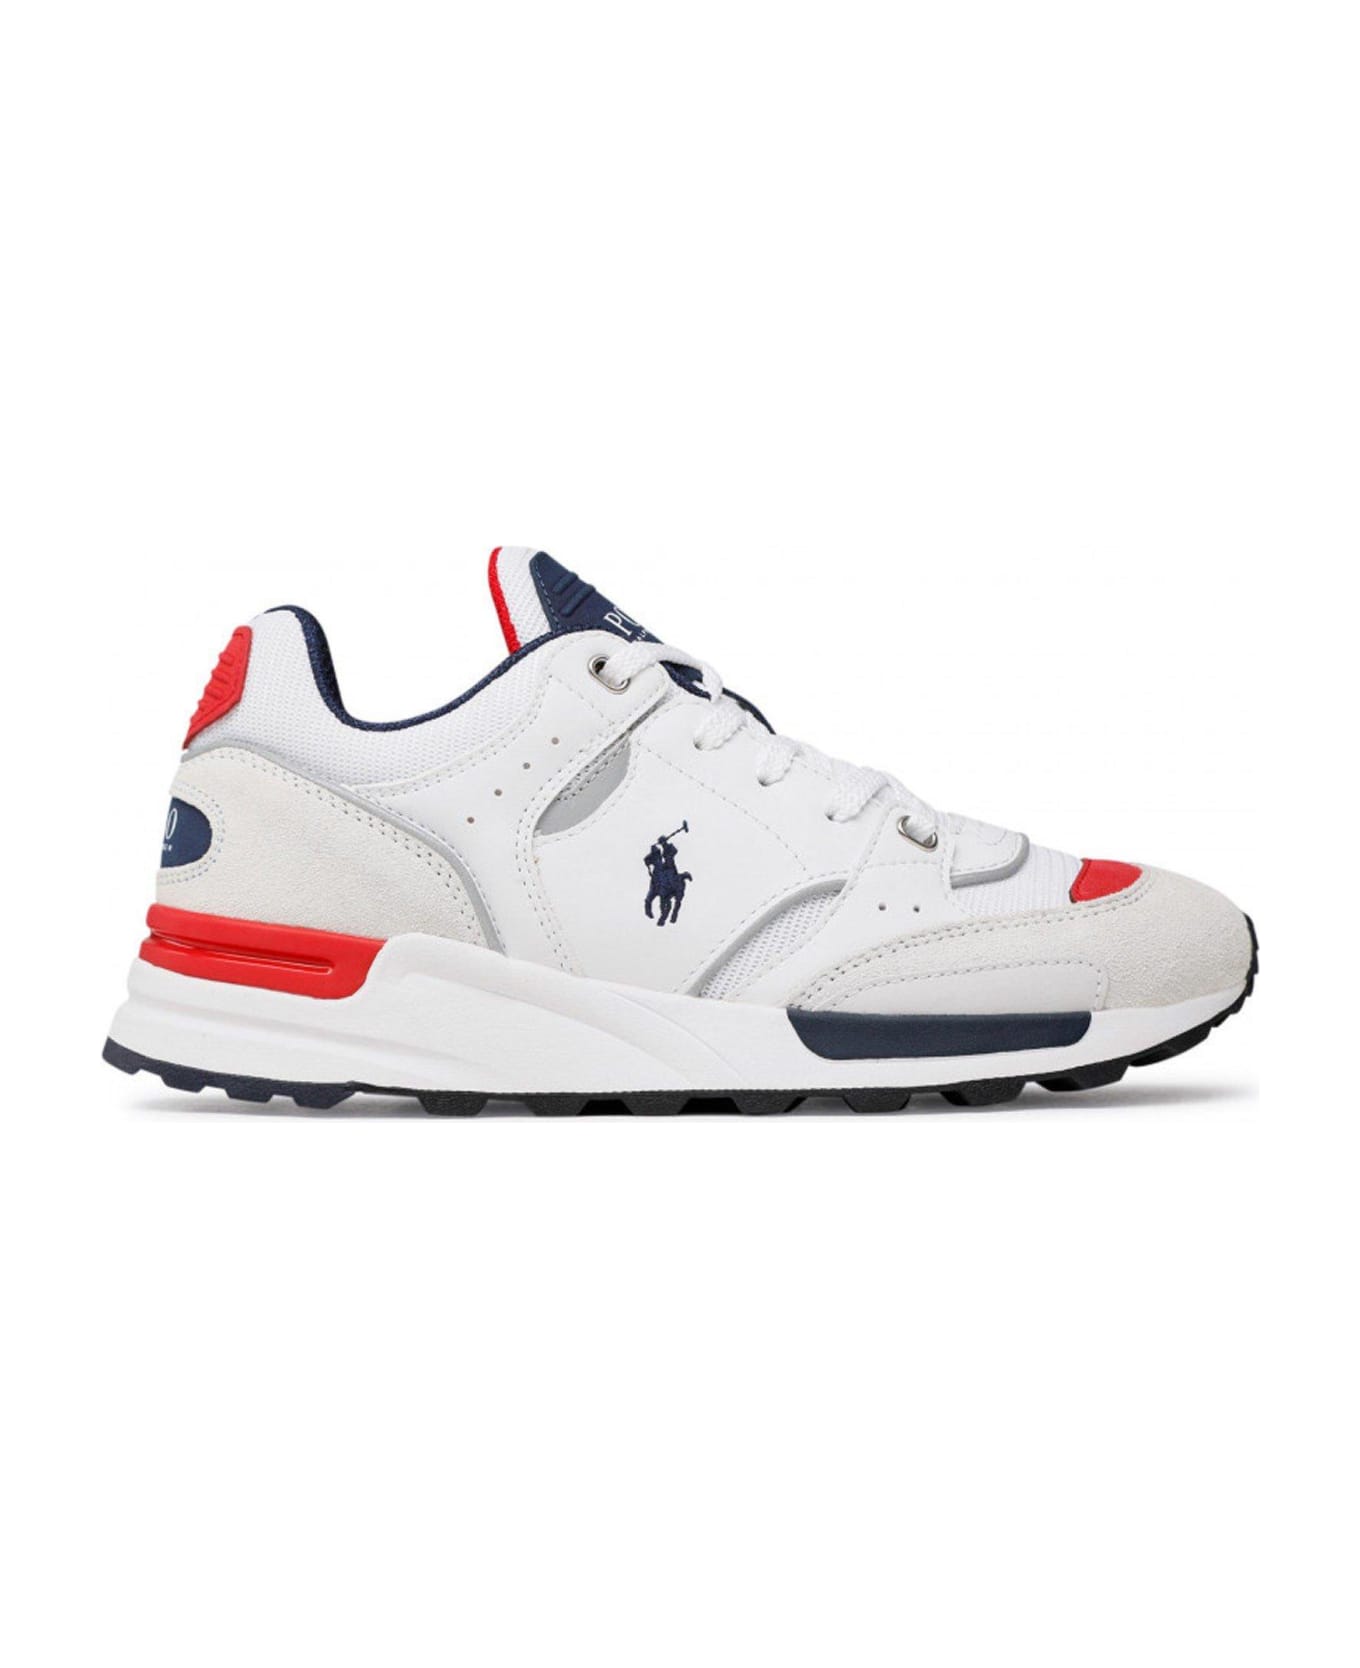 Polo Ralph Lauren Panelled Lace-up Sneakers - Grey/navy/white/red スニーカー